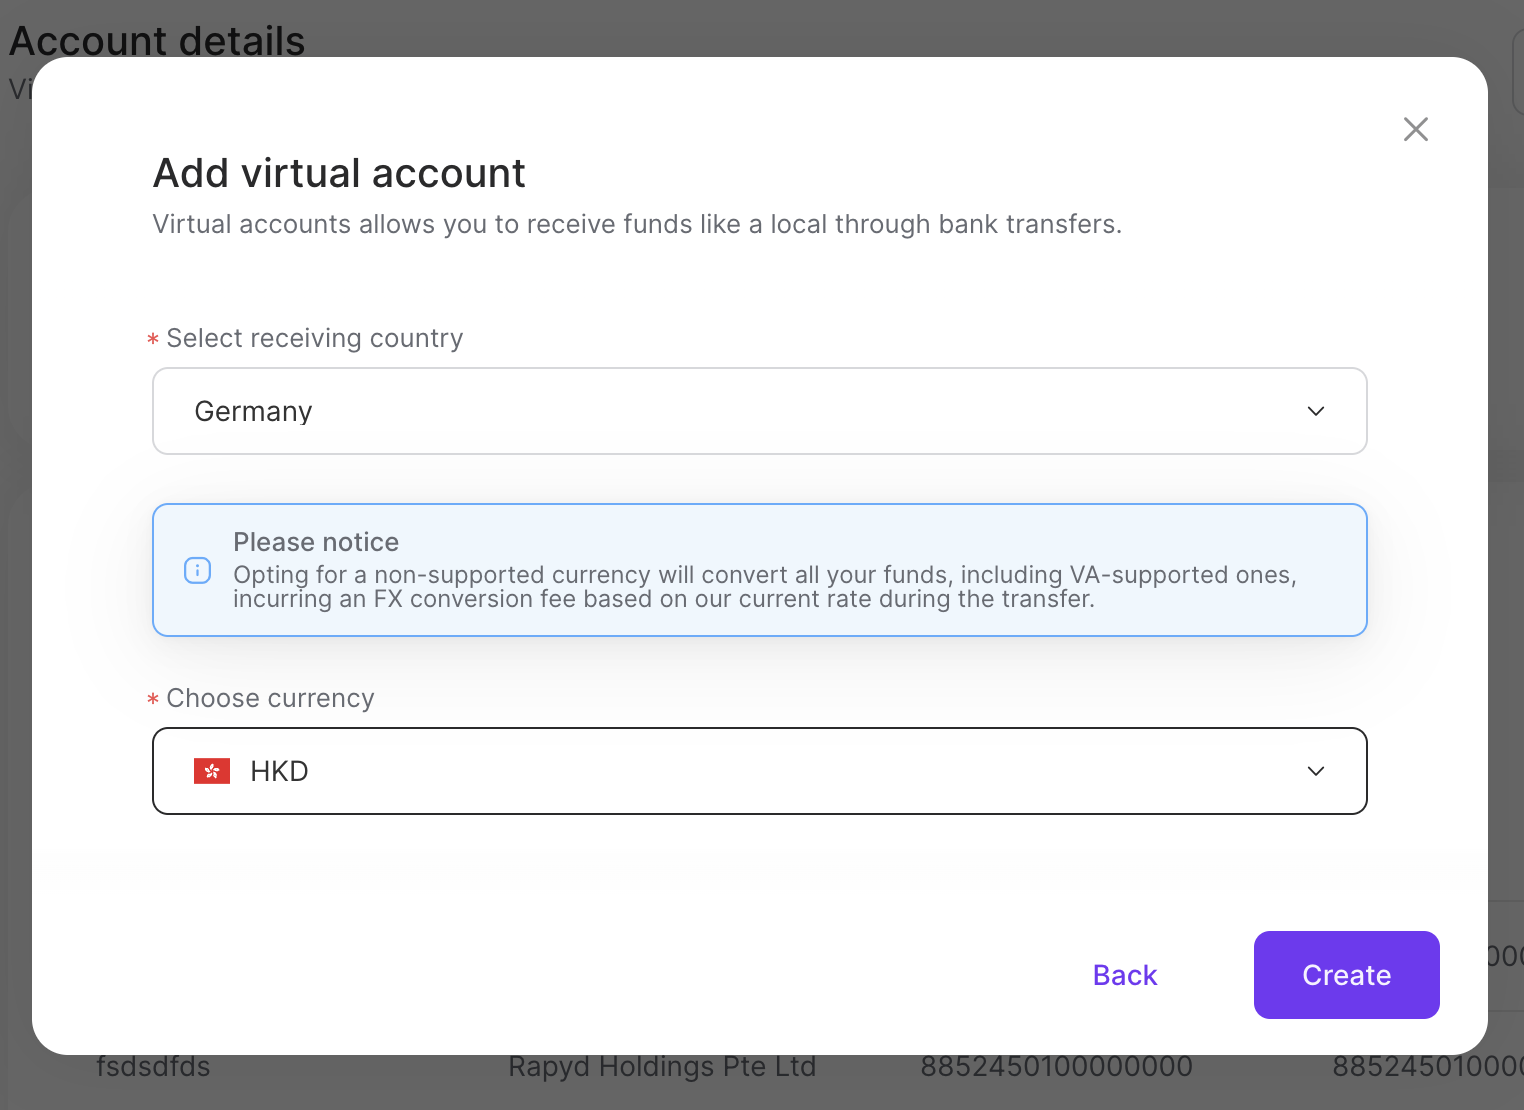 create-virtual-account-flow-4.png